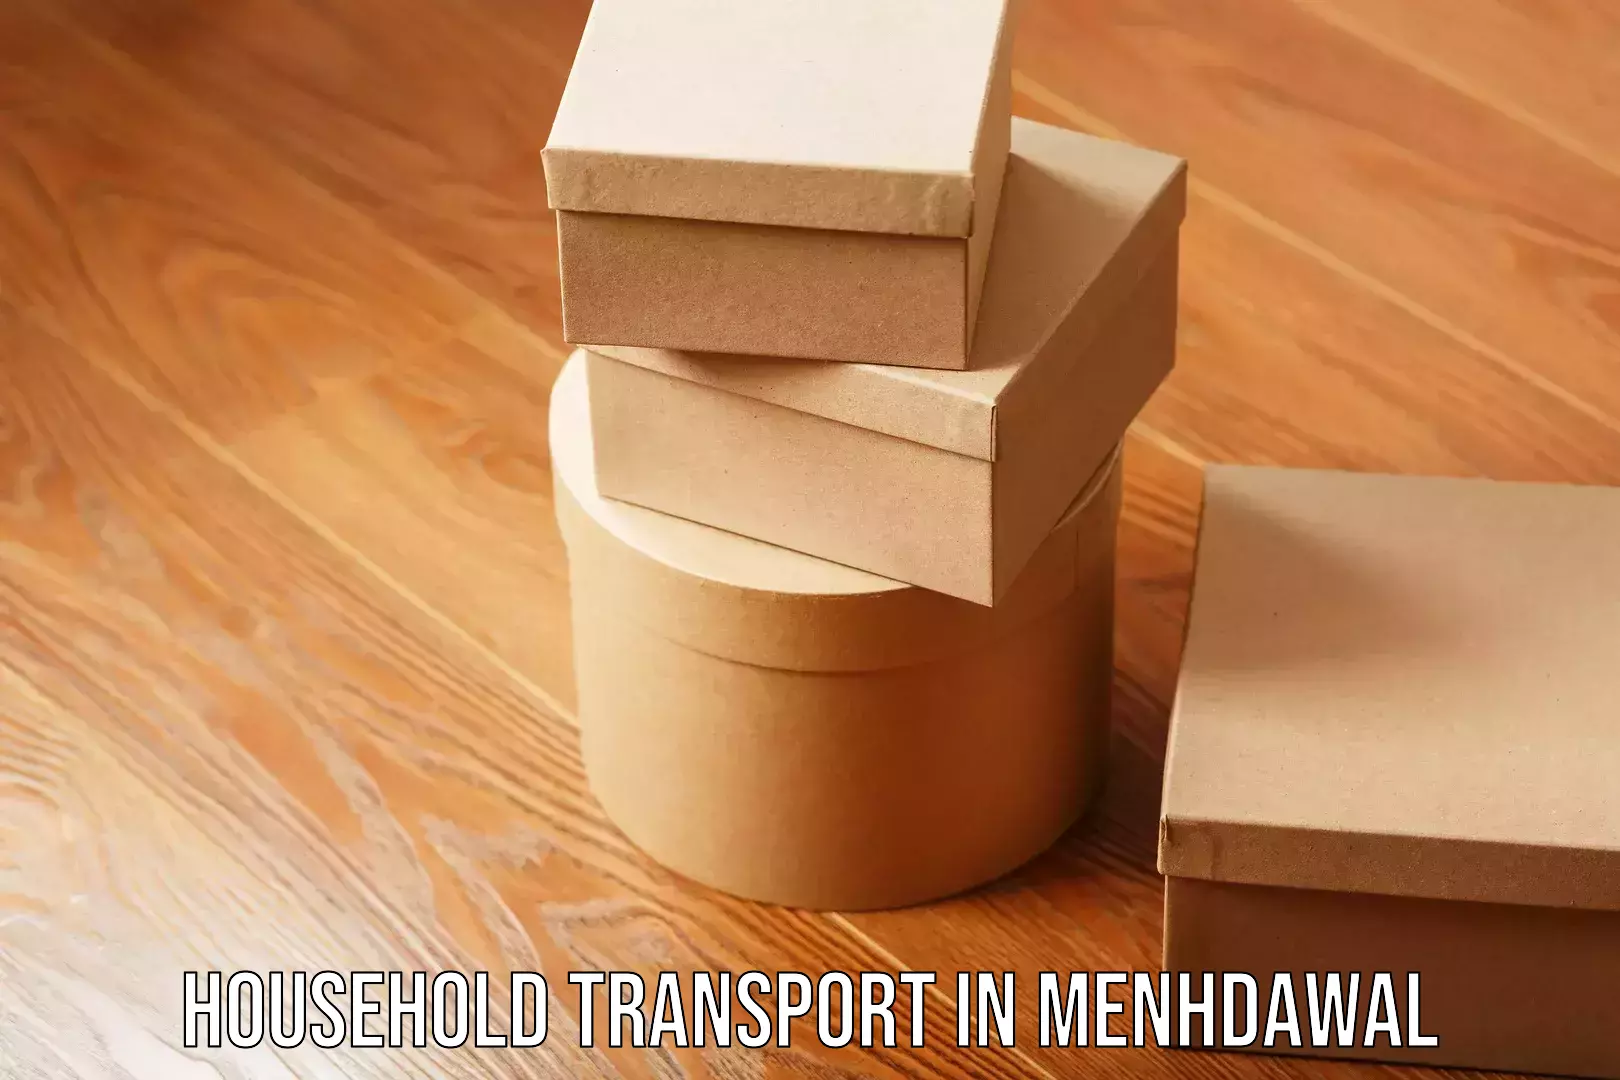 Household moving and storage in Menhdawal